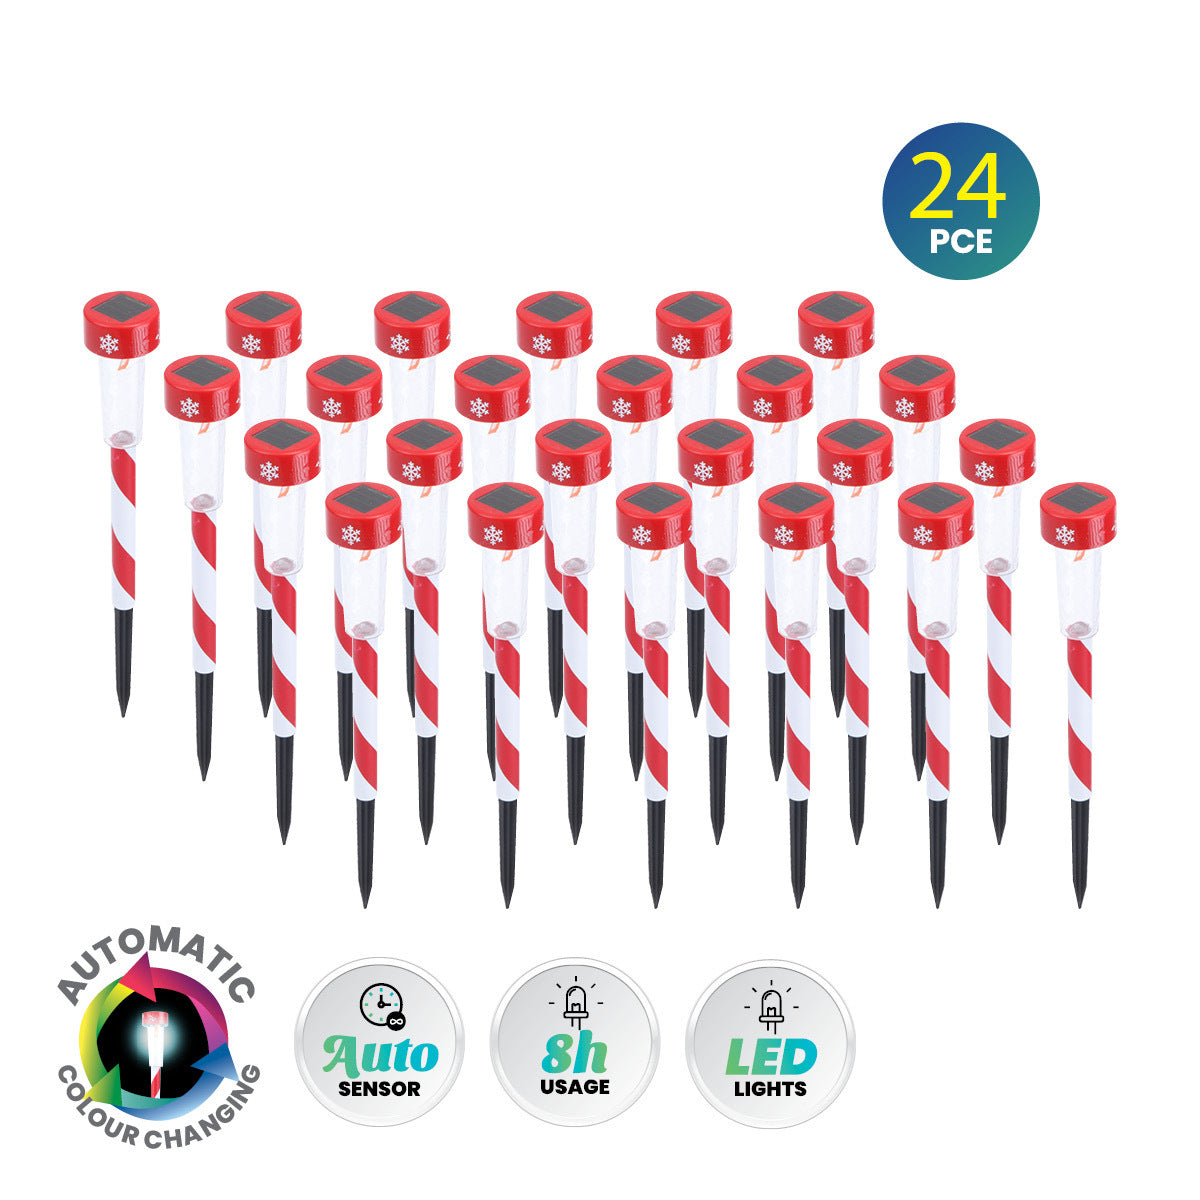 Christmas By Sas 24PCE Solar Stakes Red & White Striped Colour Changing 36cm Deals499